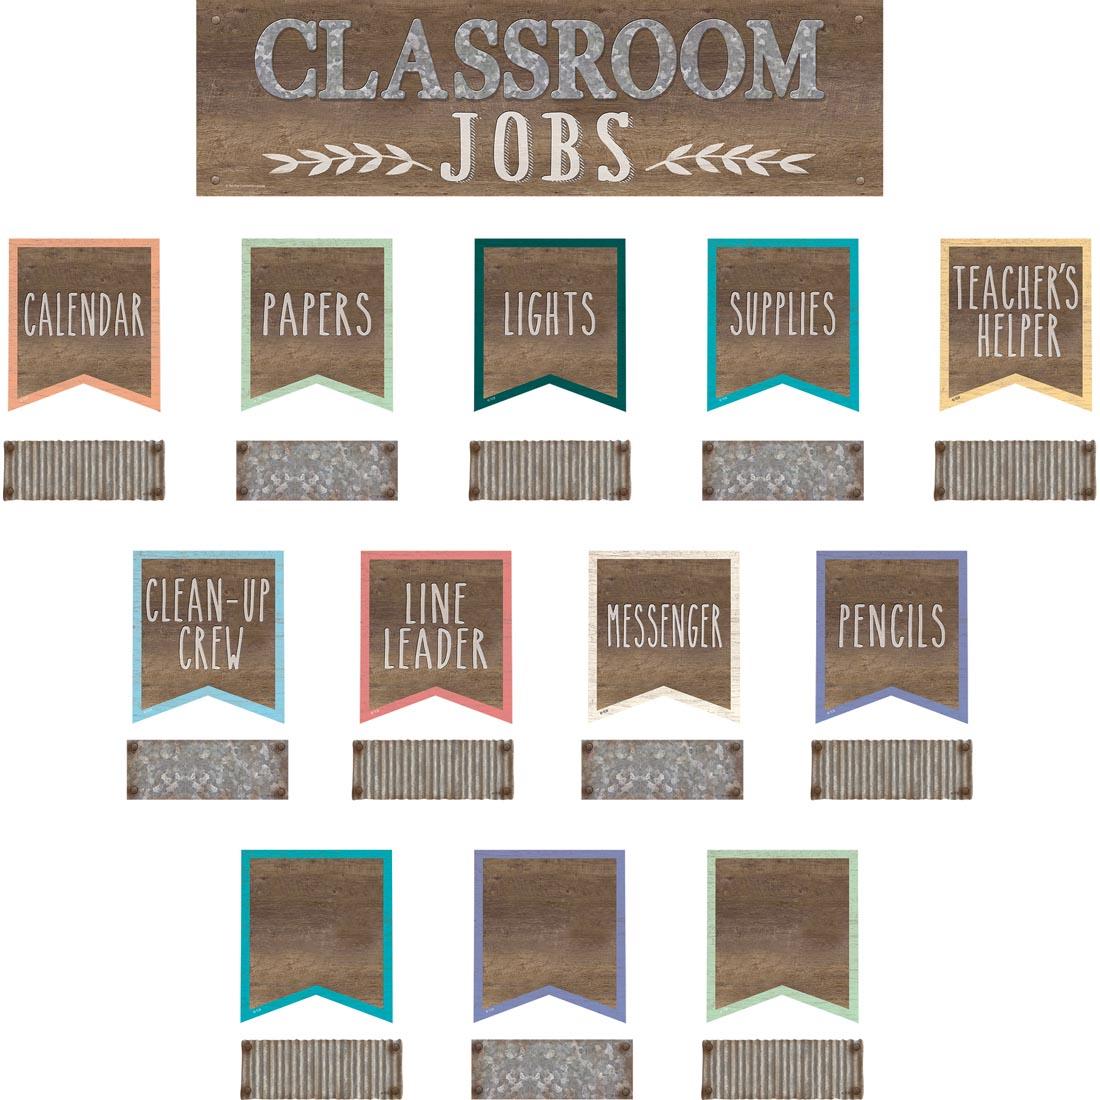 Classroom Jobs Mini Bulletin Board Set from the Home Sweet Classroom collection by Teacher Created Resources